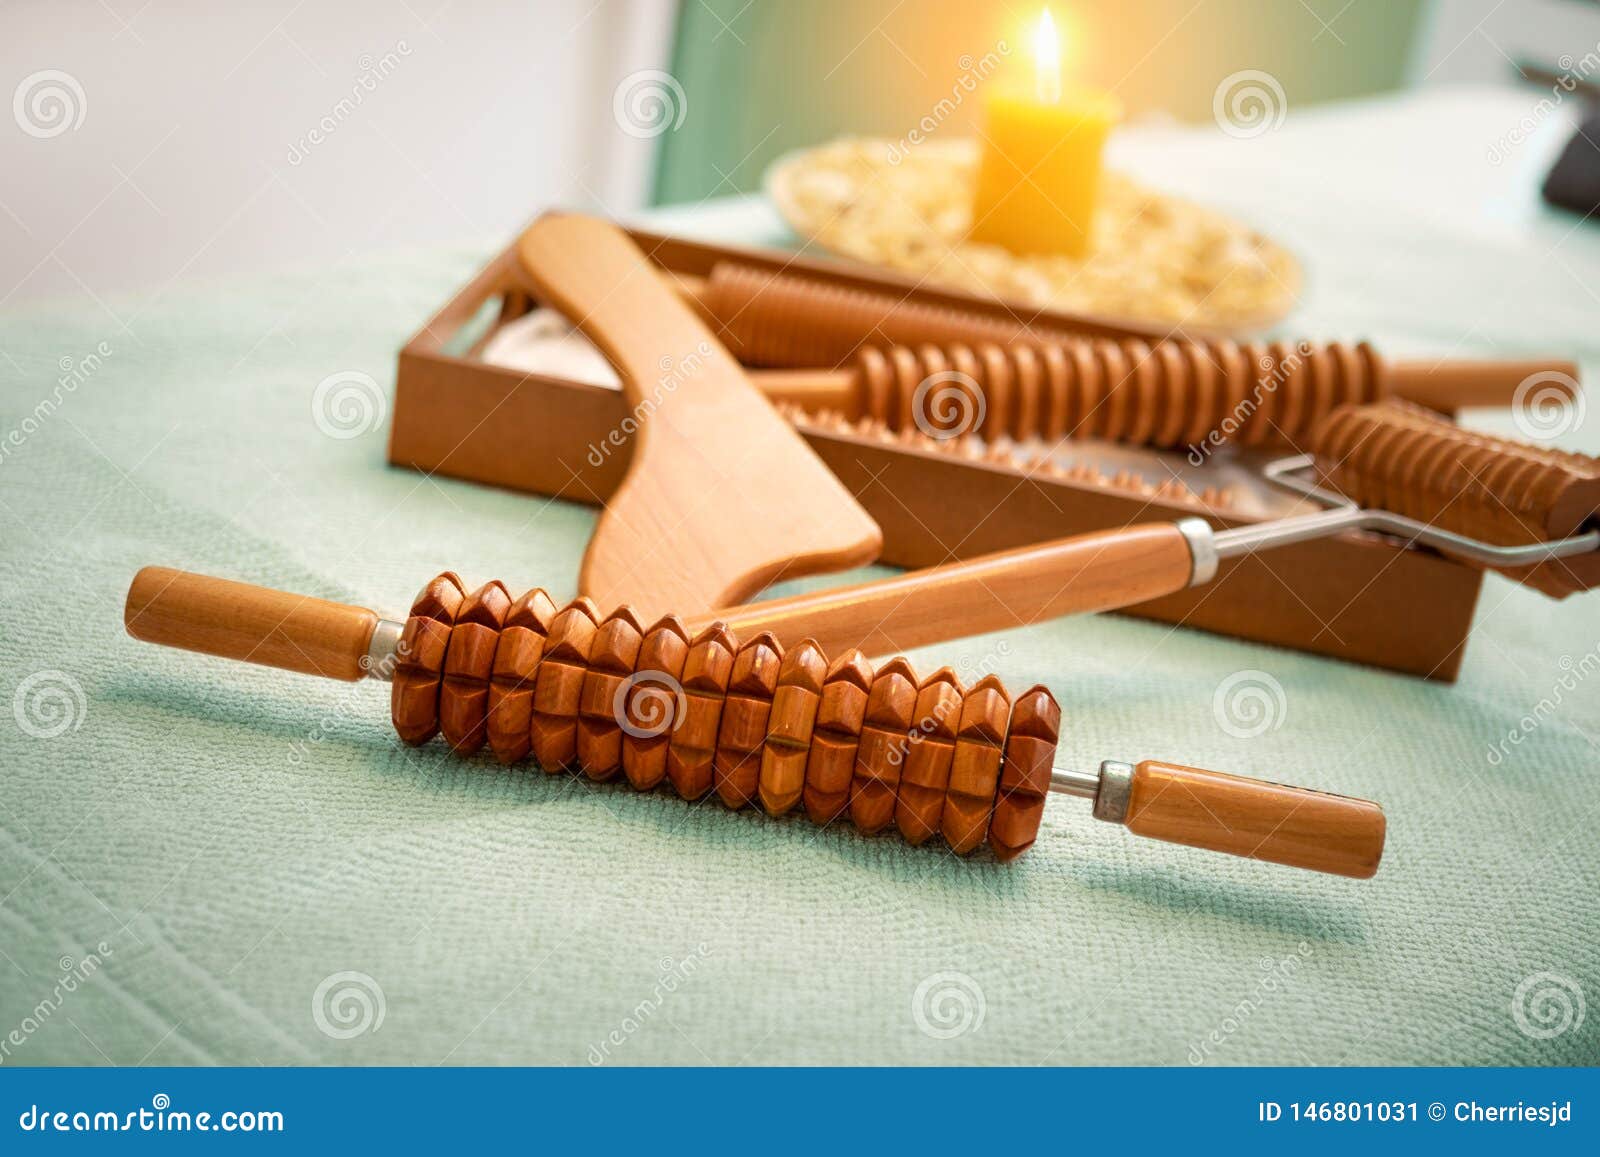 wooden massage tools for madero therapy